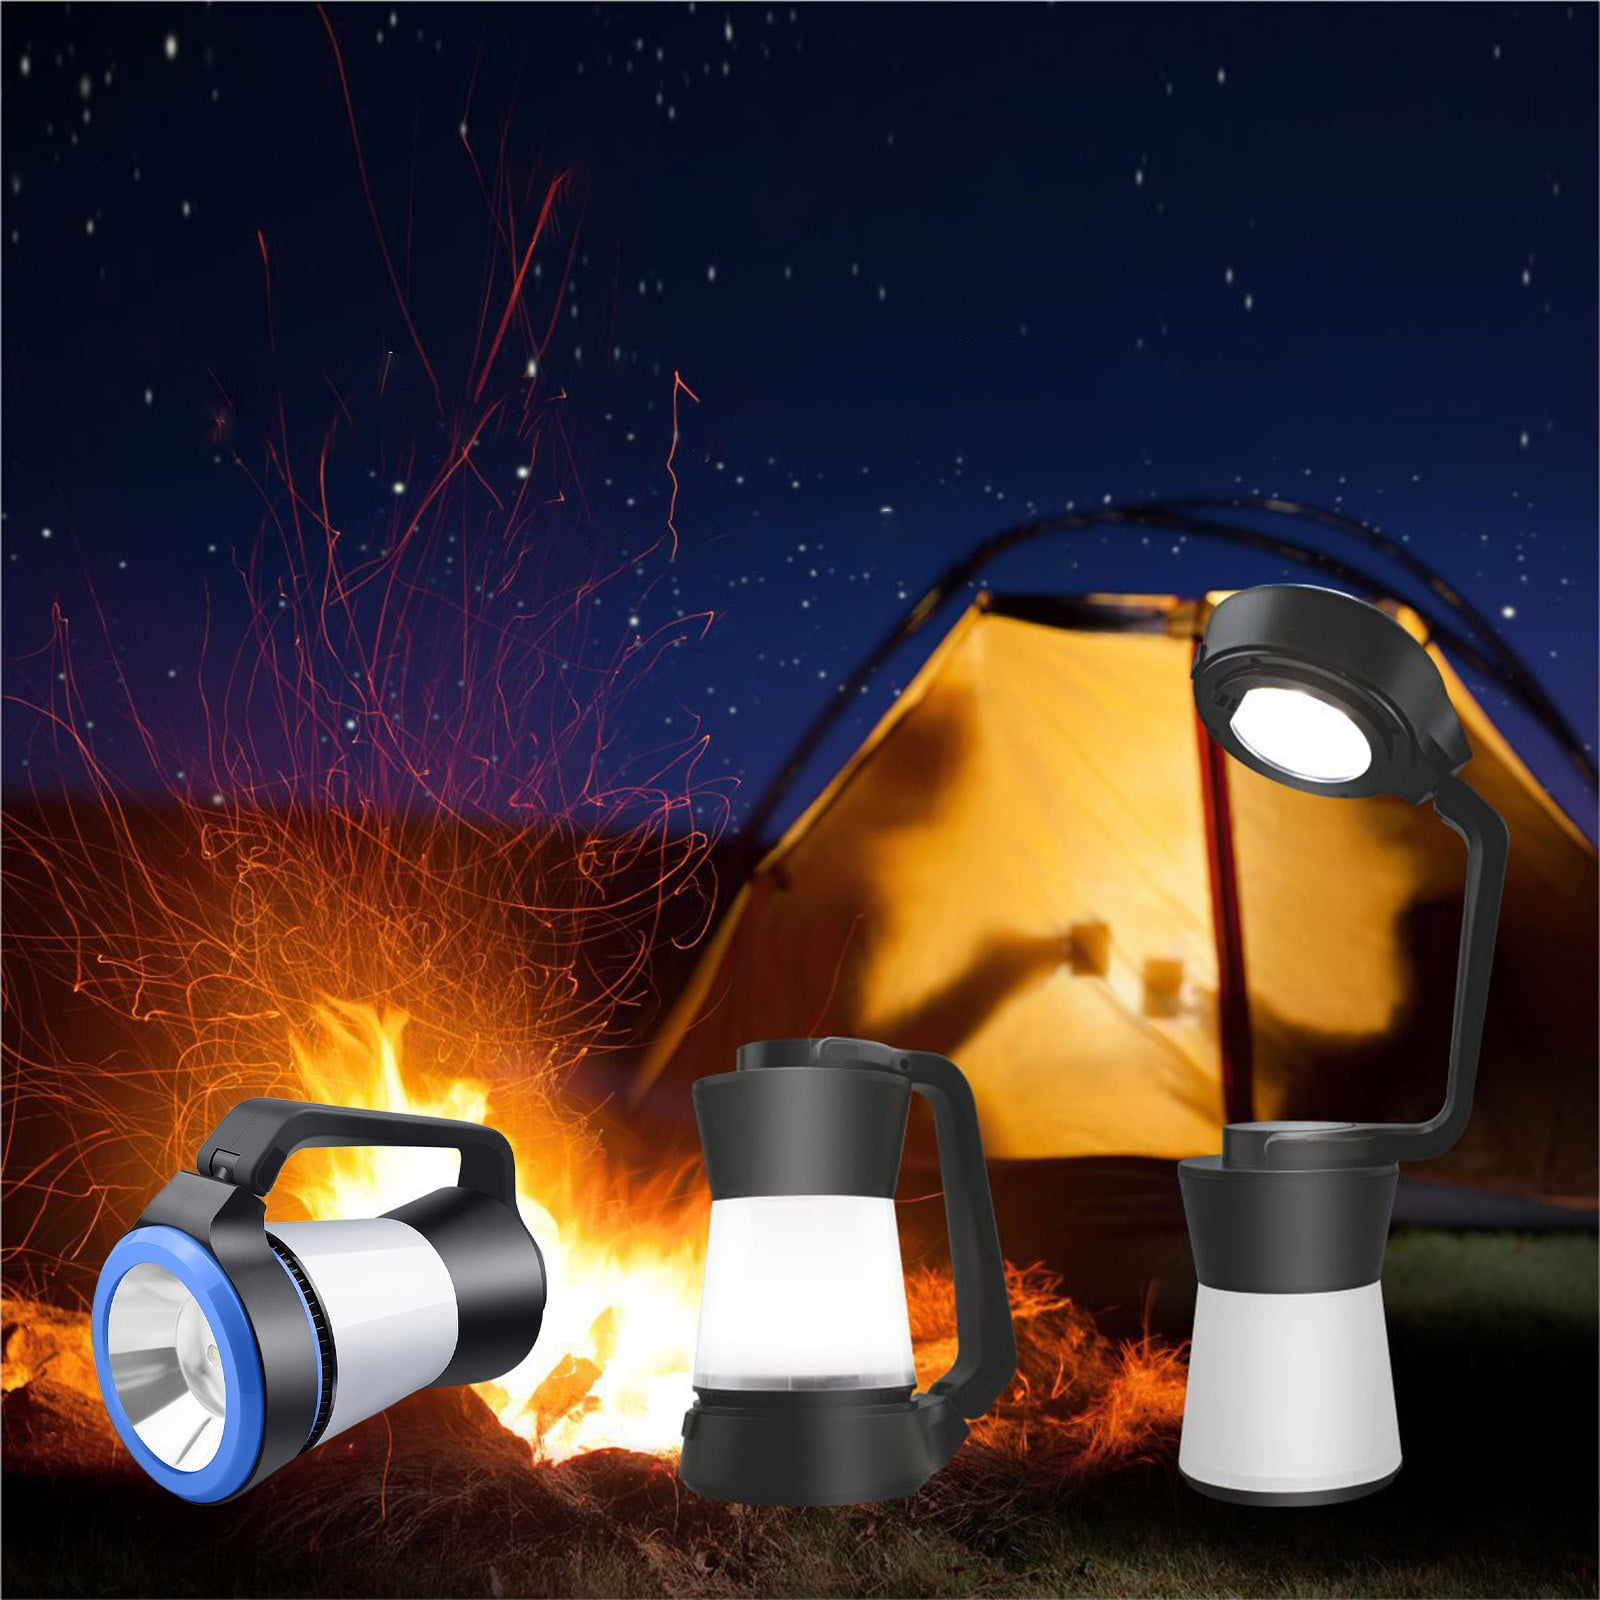 3 in 1 LED Lantern, Flashlight and Panel Light, Lightweight Camping Lantern  By Wakeman Outdoors (For Camping Hiking Reading and Emergency)